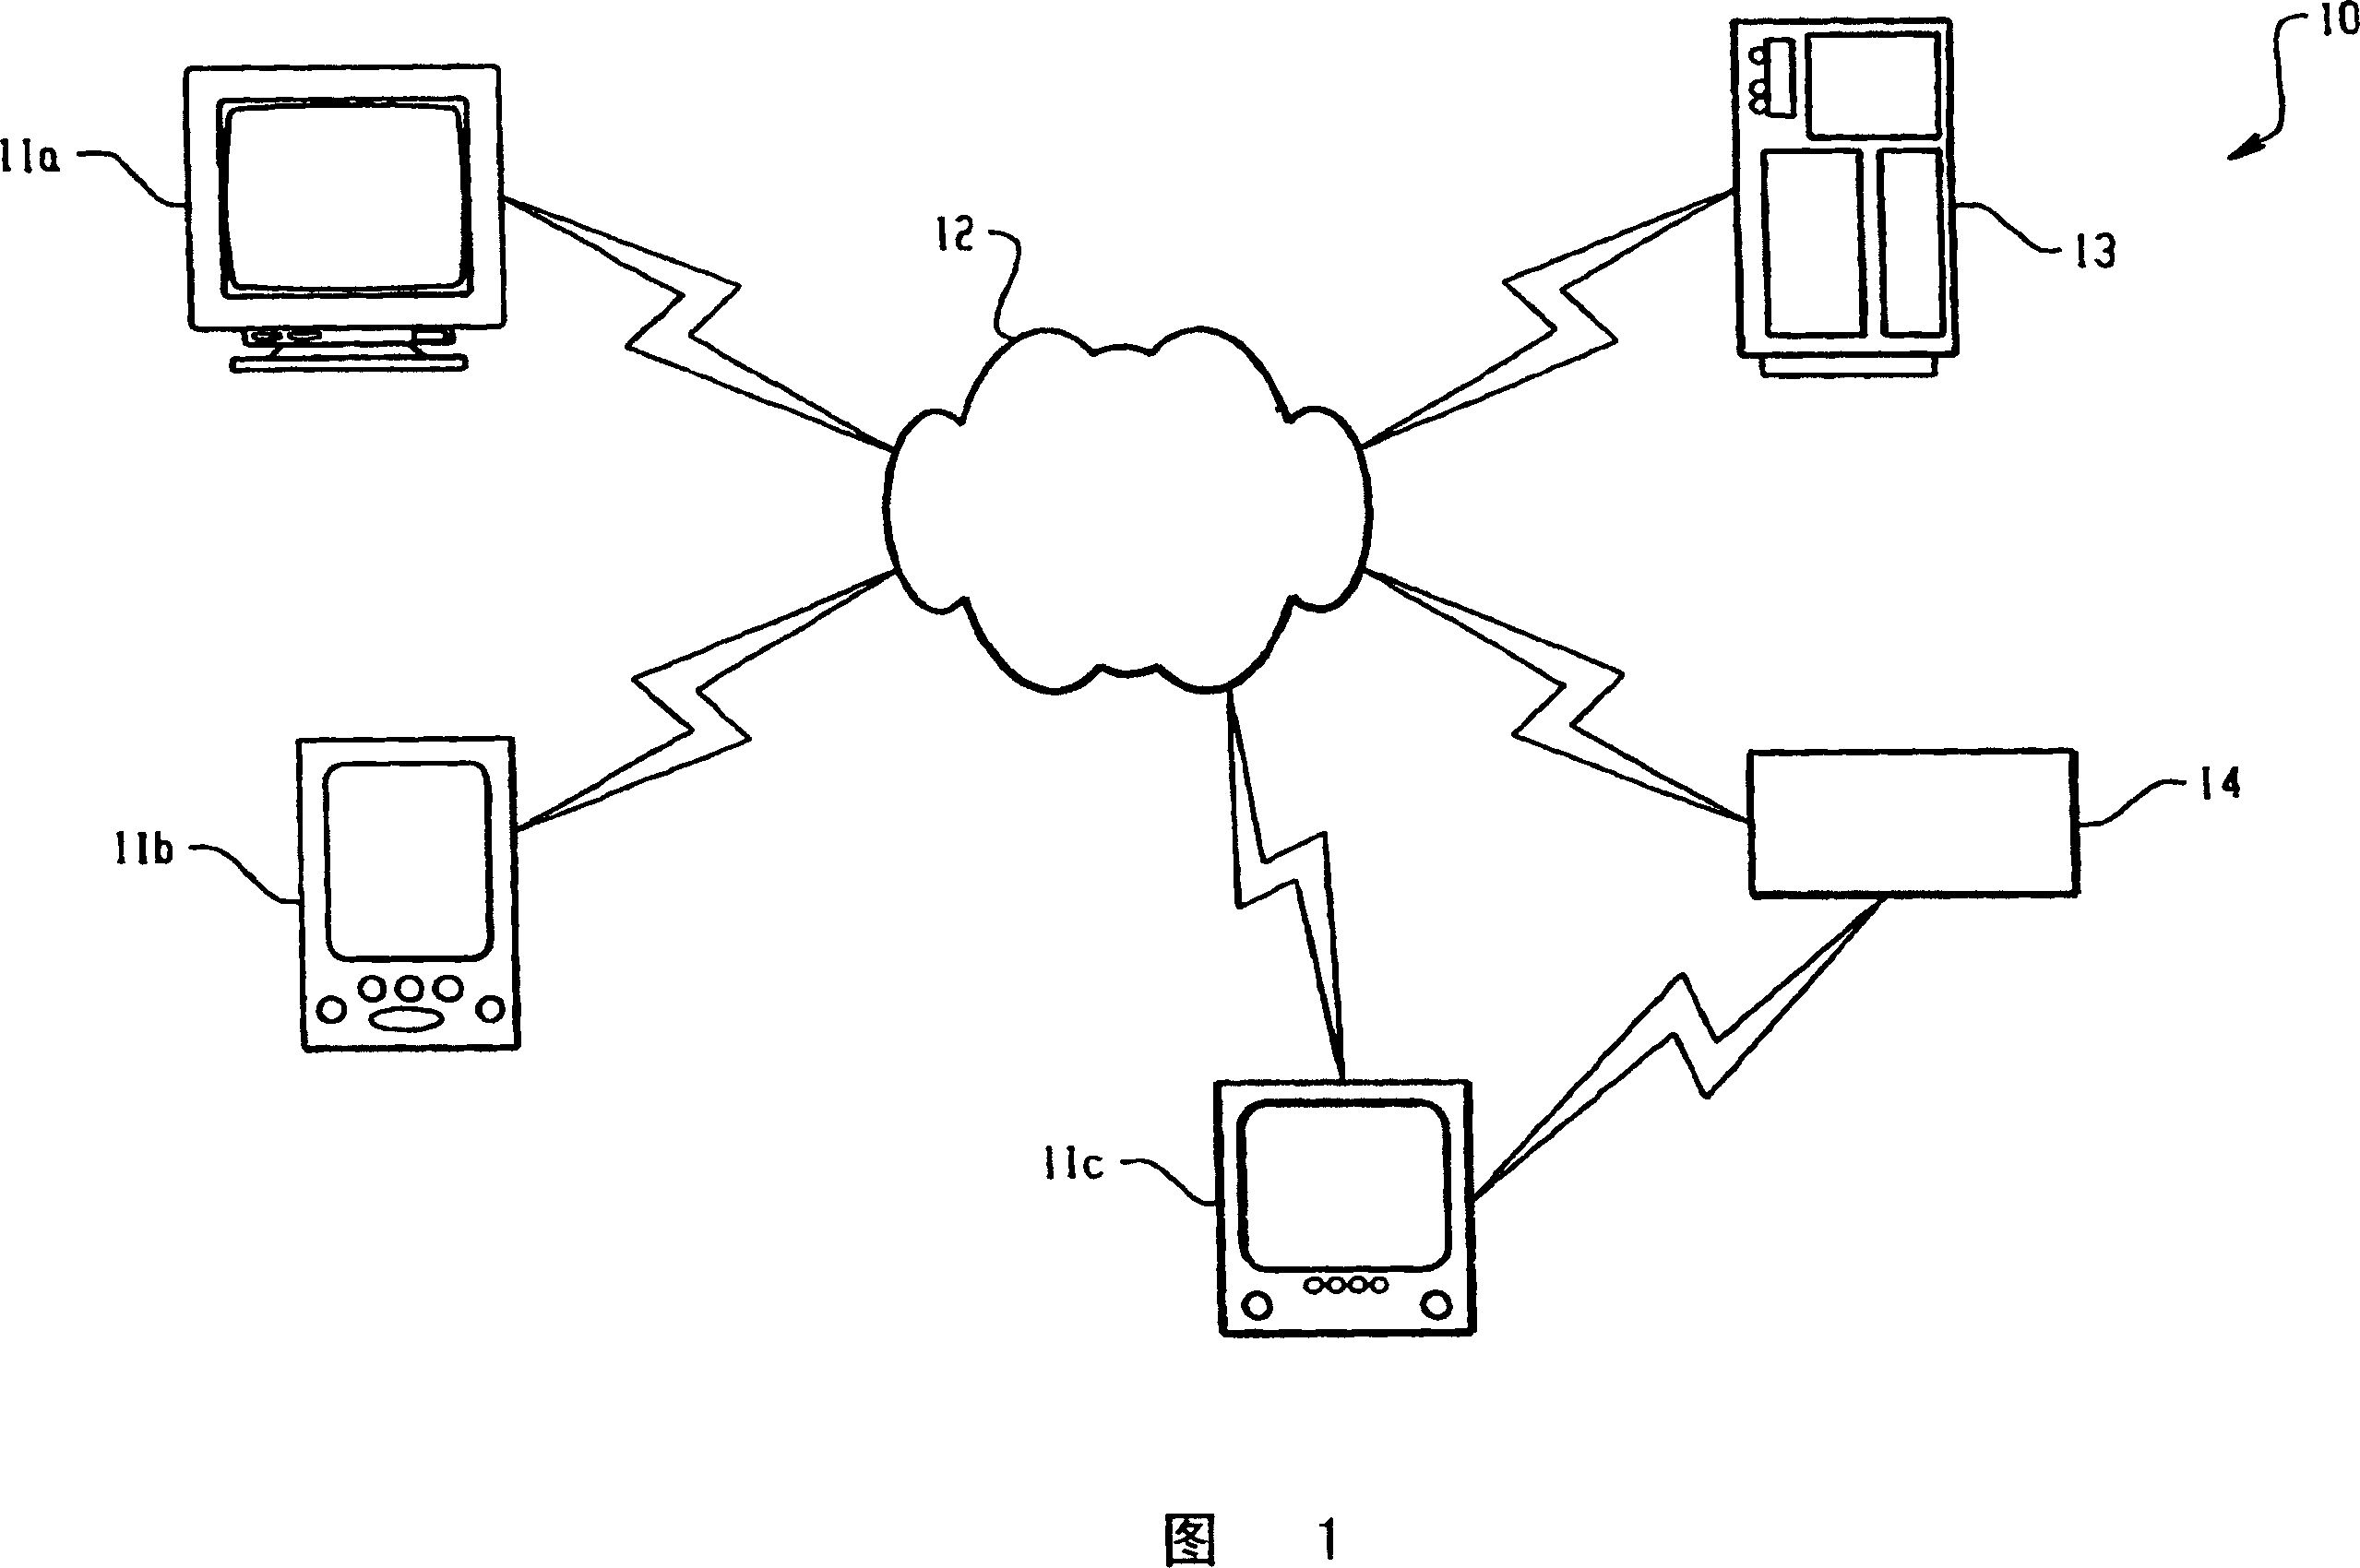 Method for delivering subjective surveys linked to subjective and objective data